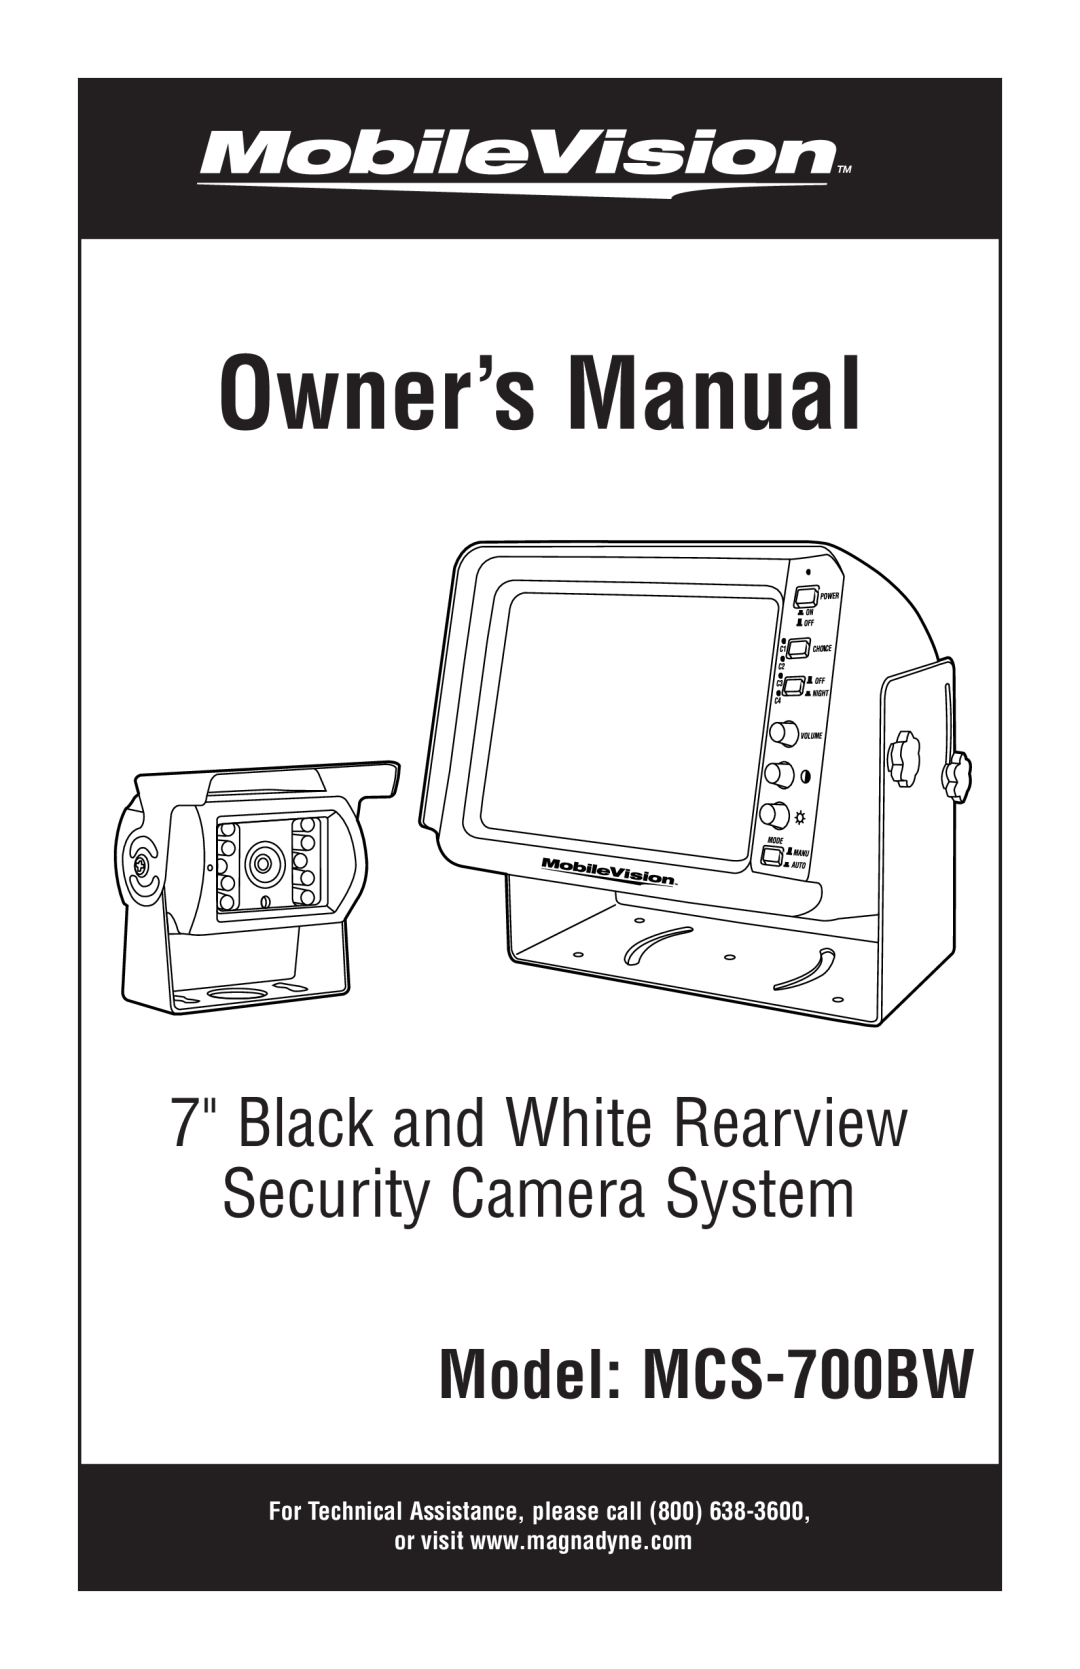 Magnadyne owner manual Owner’s Manual, Black and White Rearview Security Camera System, Model MCS-700BW 